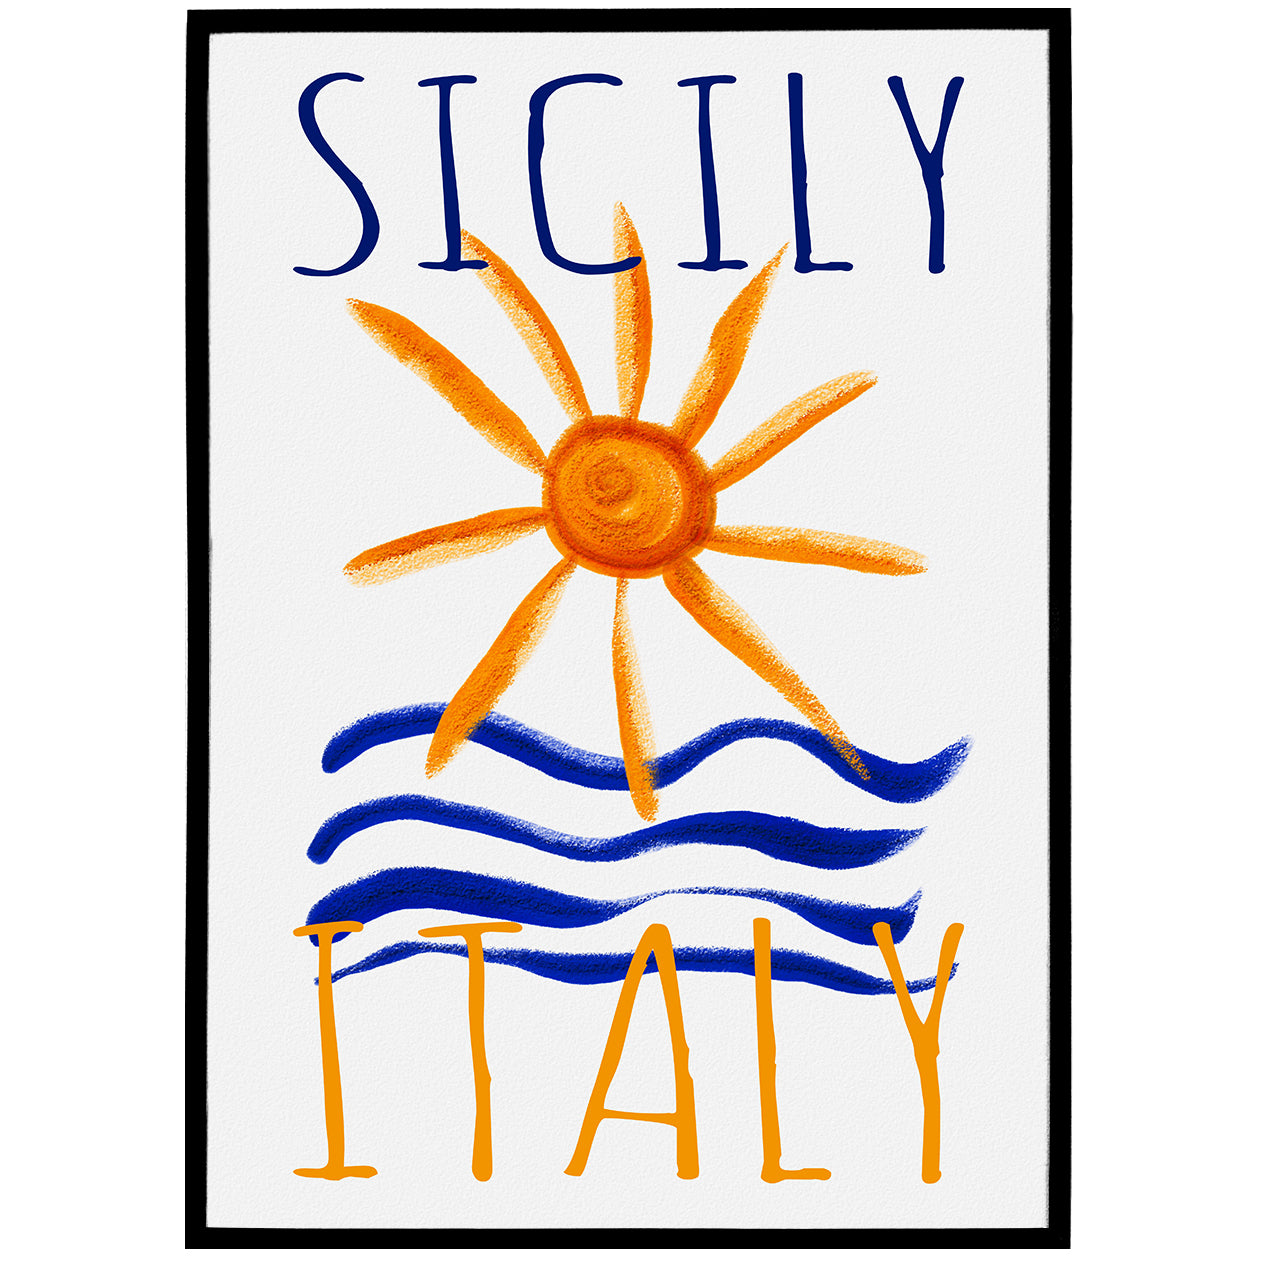 Sicily Italy Travel Aesthetic Poster